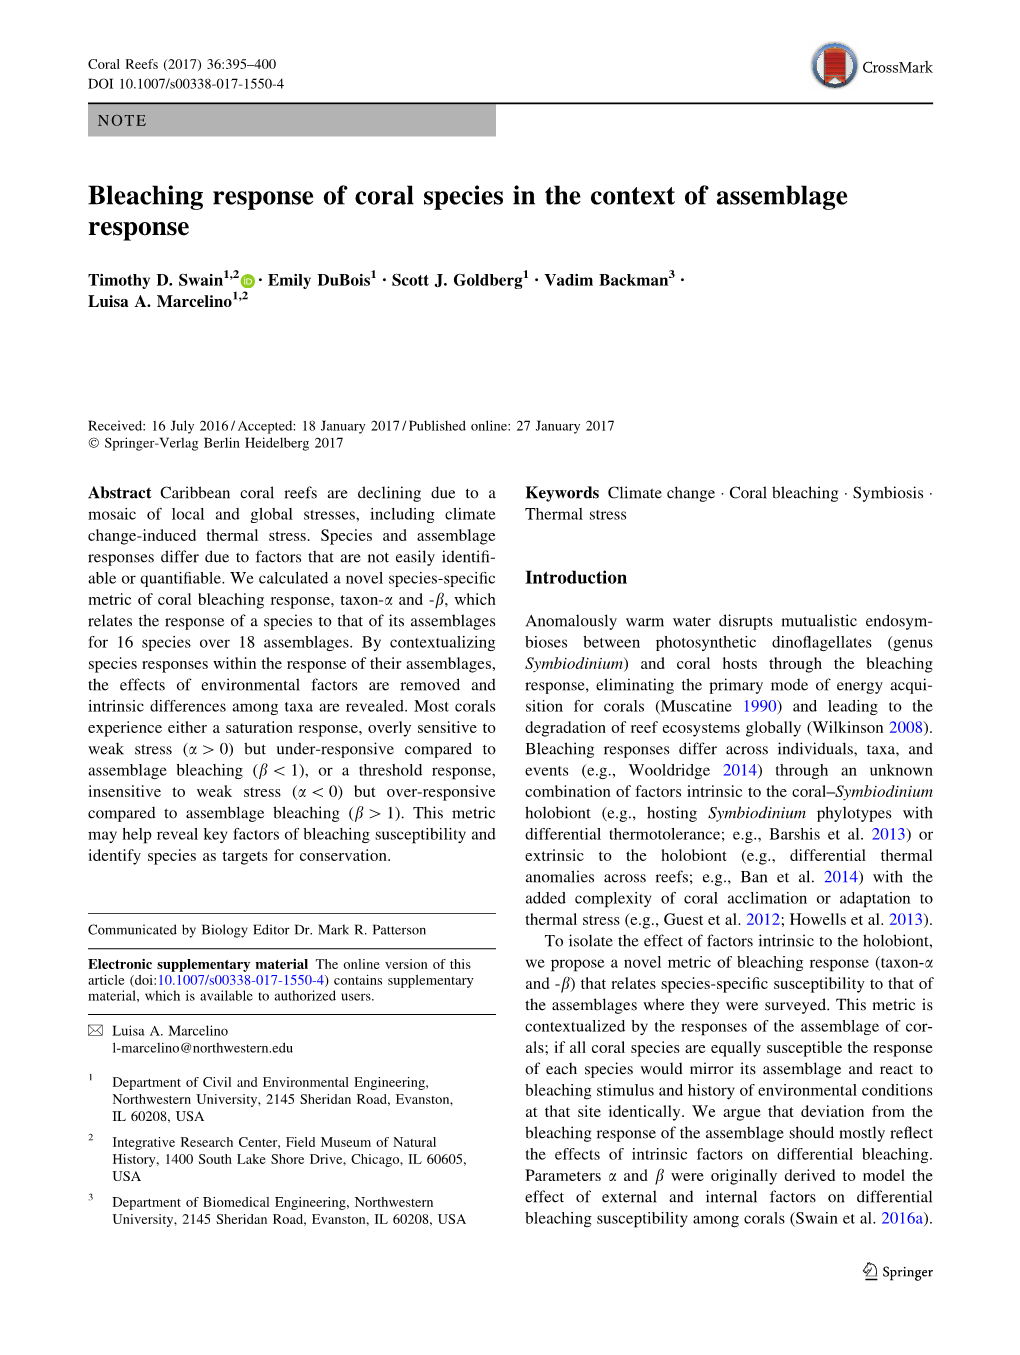 Bleaching Response of Coral Species in the Context of Assemblage Response